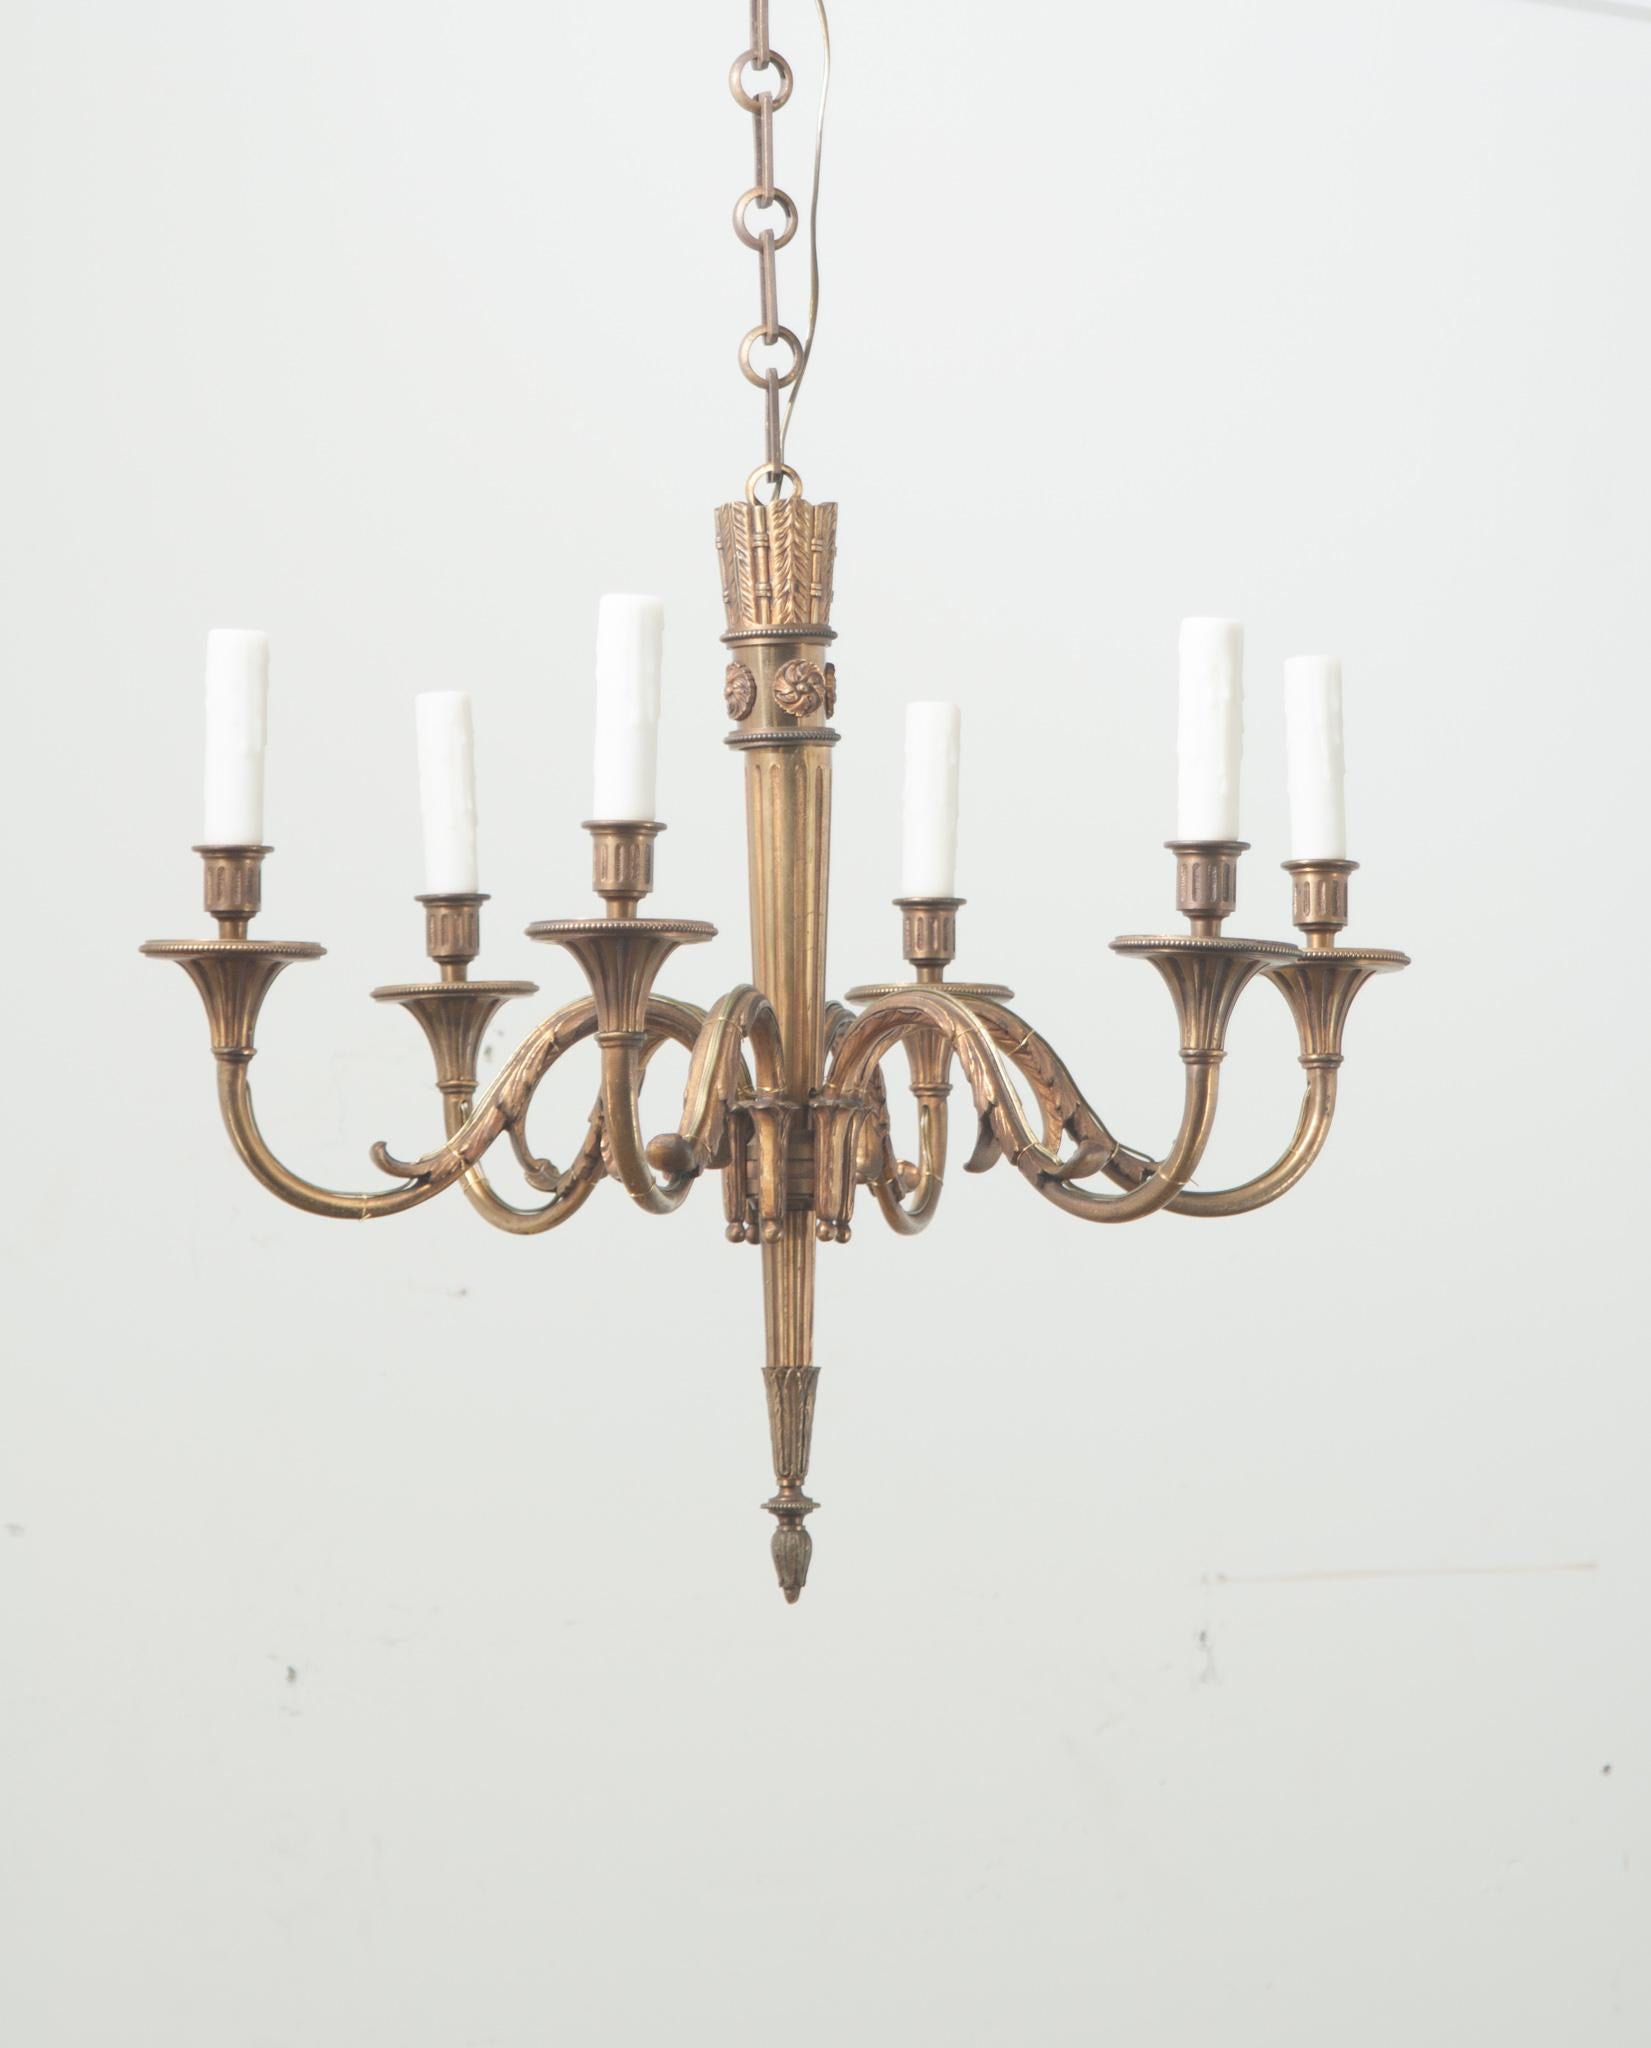 A classic Louis XVI style six light brass chandelier. The center of the fixture is shaped like a quiver of arrows and has six substantial scalloped arms with faux candle covers. This chandelier has been cleaned and wired for US electrical using UL